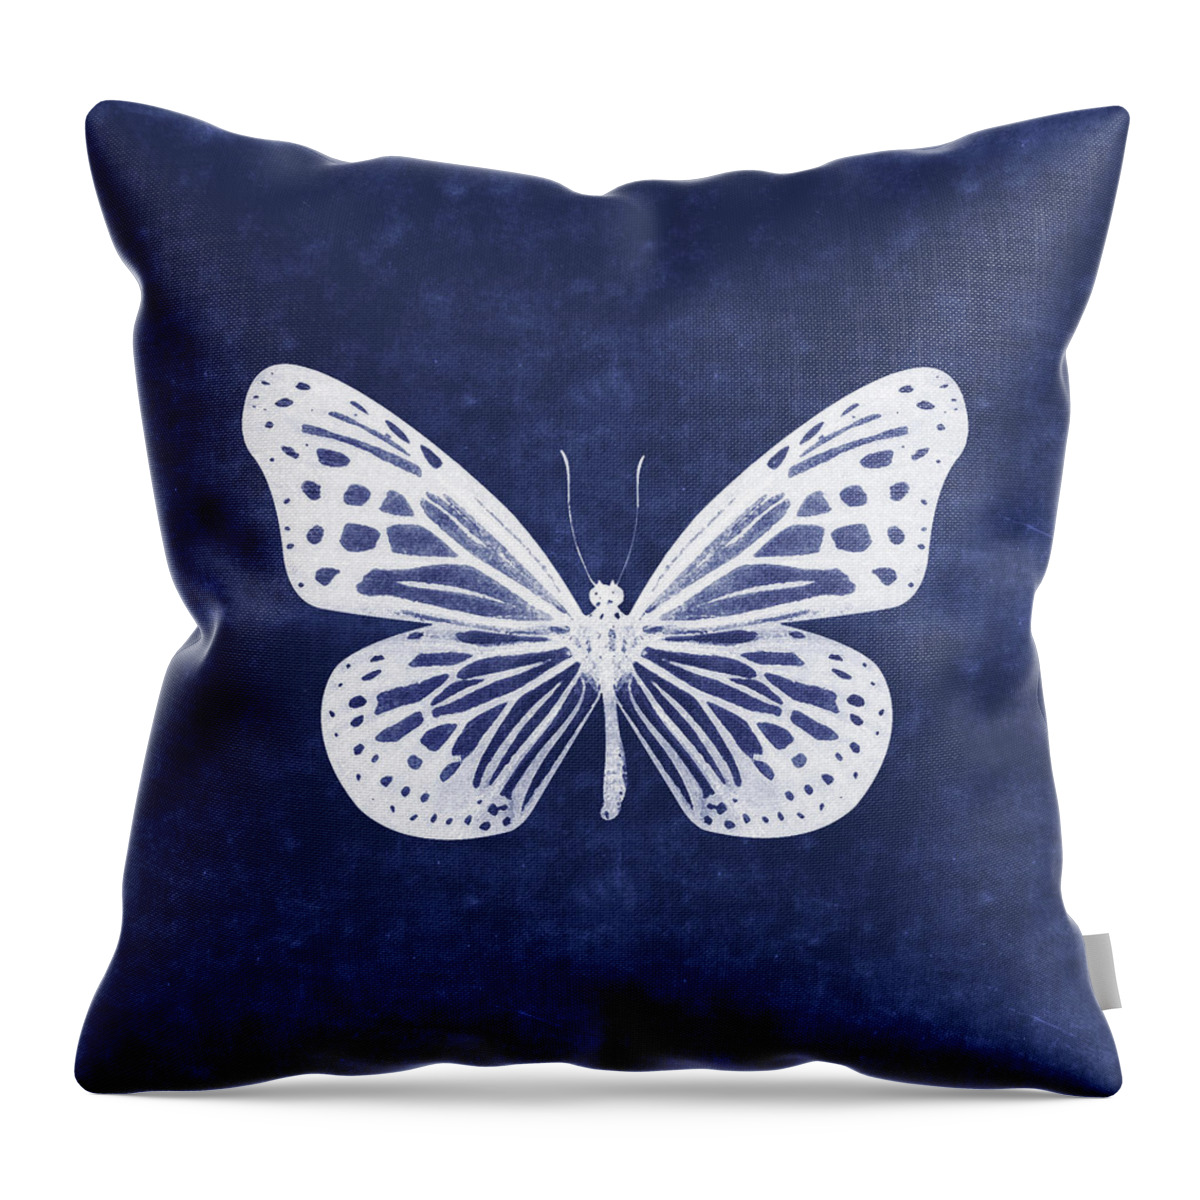 Butterfly Throw Pillow featuring the mixed media White and Indigo Butterfly- Art by Linda Woods by Linda Woods